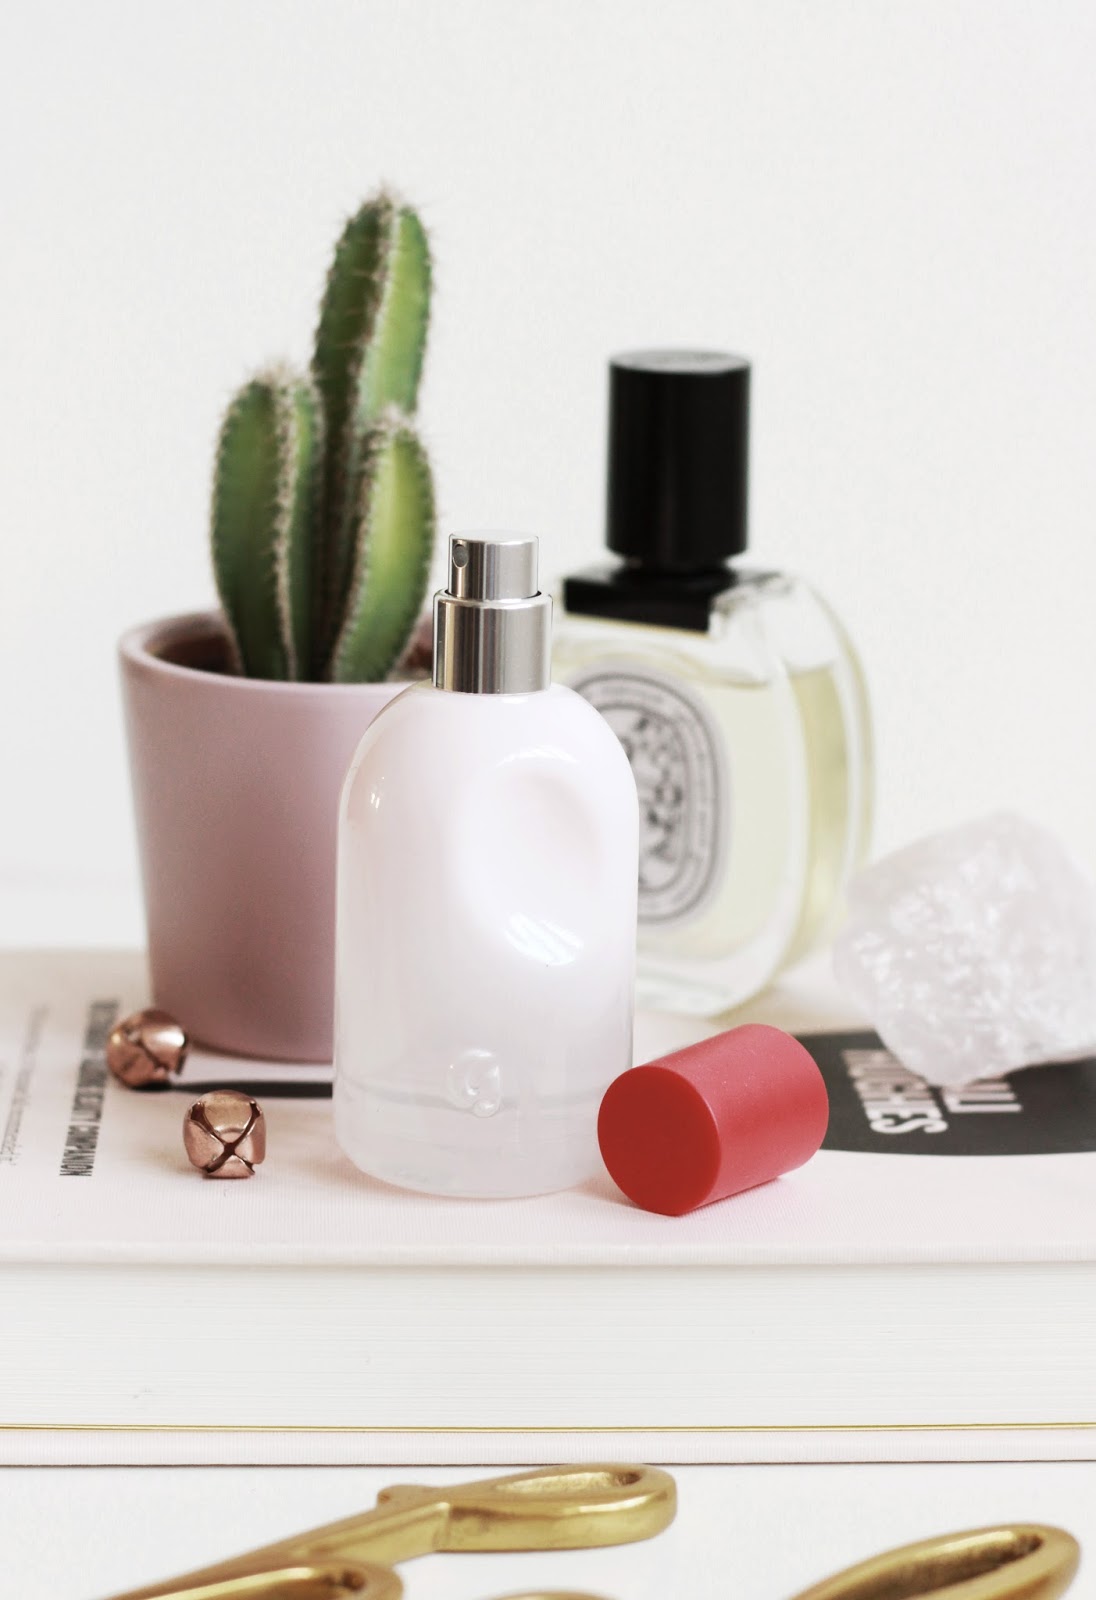 Glossier You Perfume Review